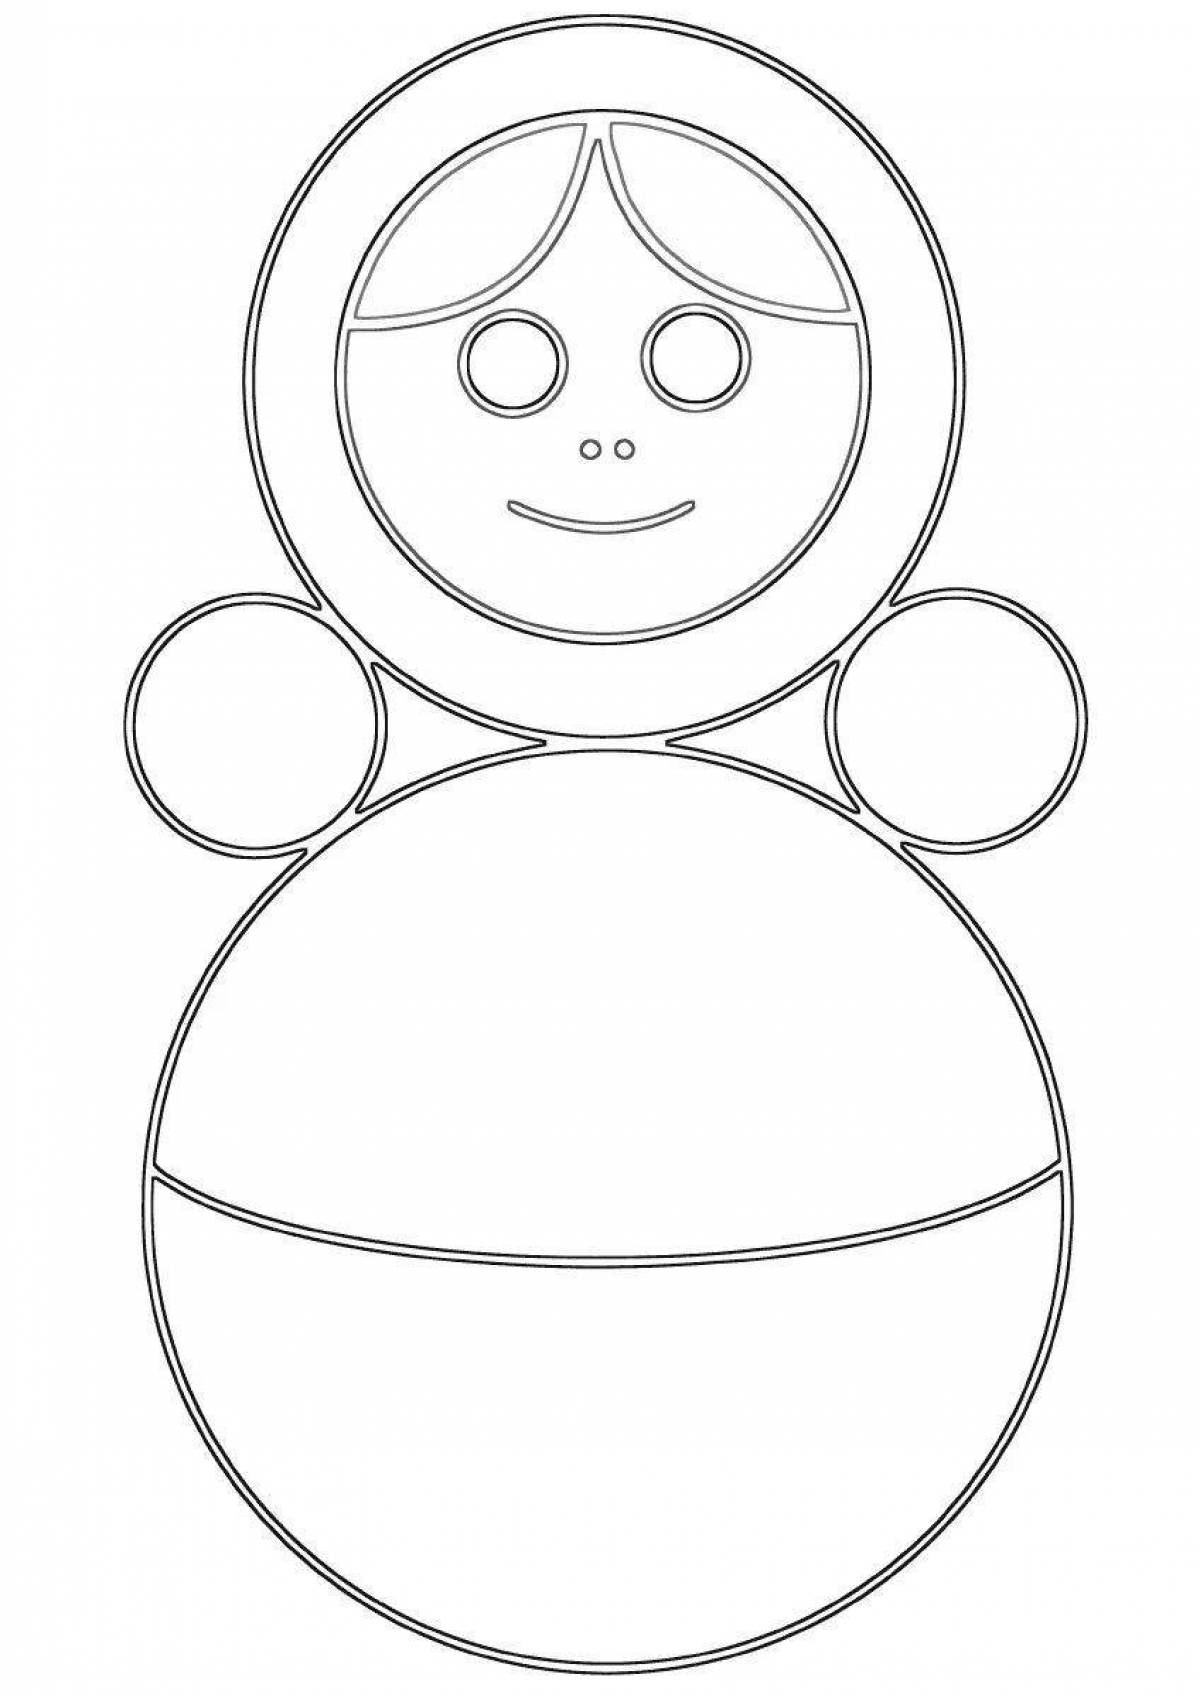 Fun toy coloring pages